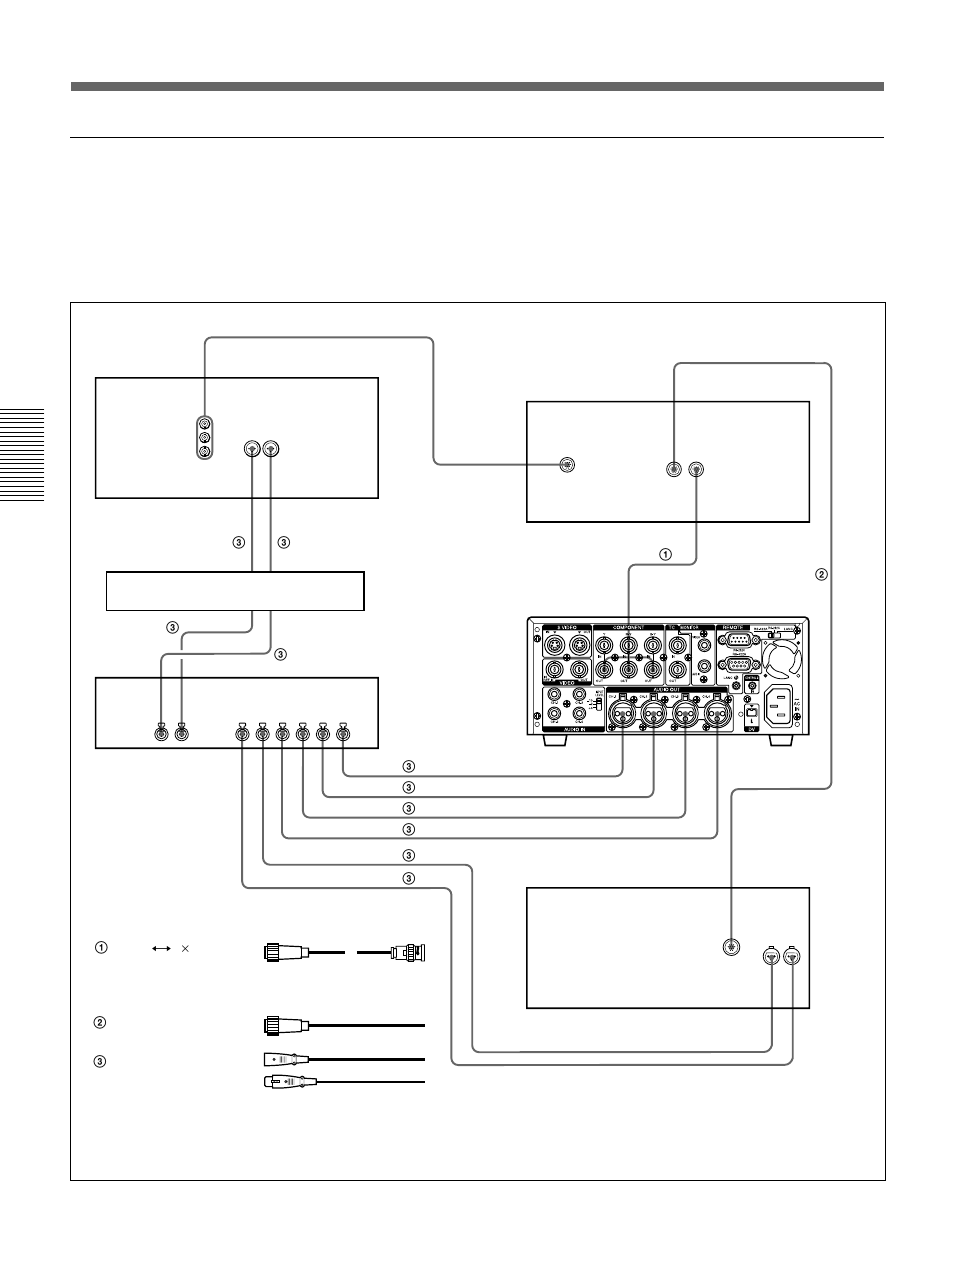 Connections for an a/b roll editing system, Video/audio signal connections | Sony DSR-45/45P Manuel d'utilisation | Page 54 / 220